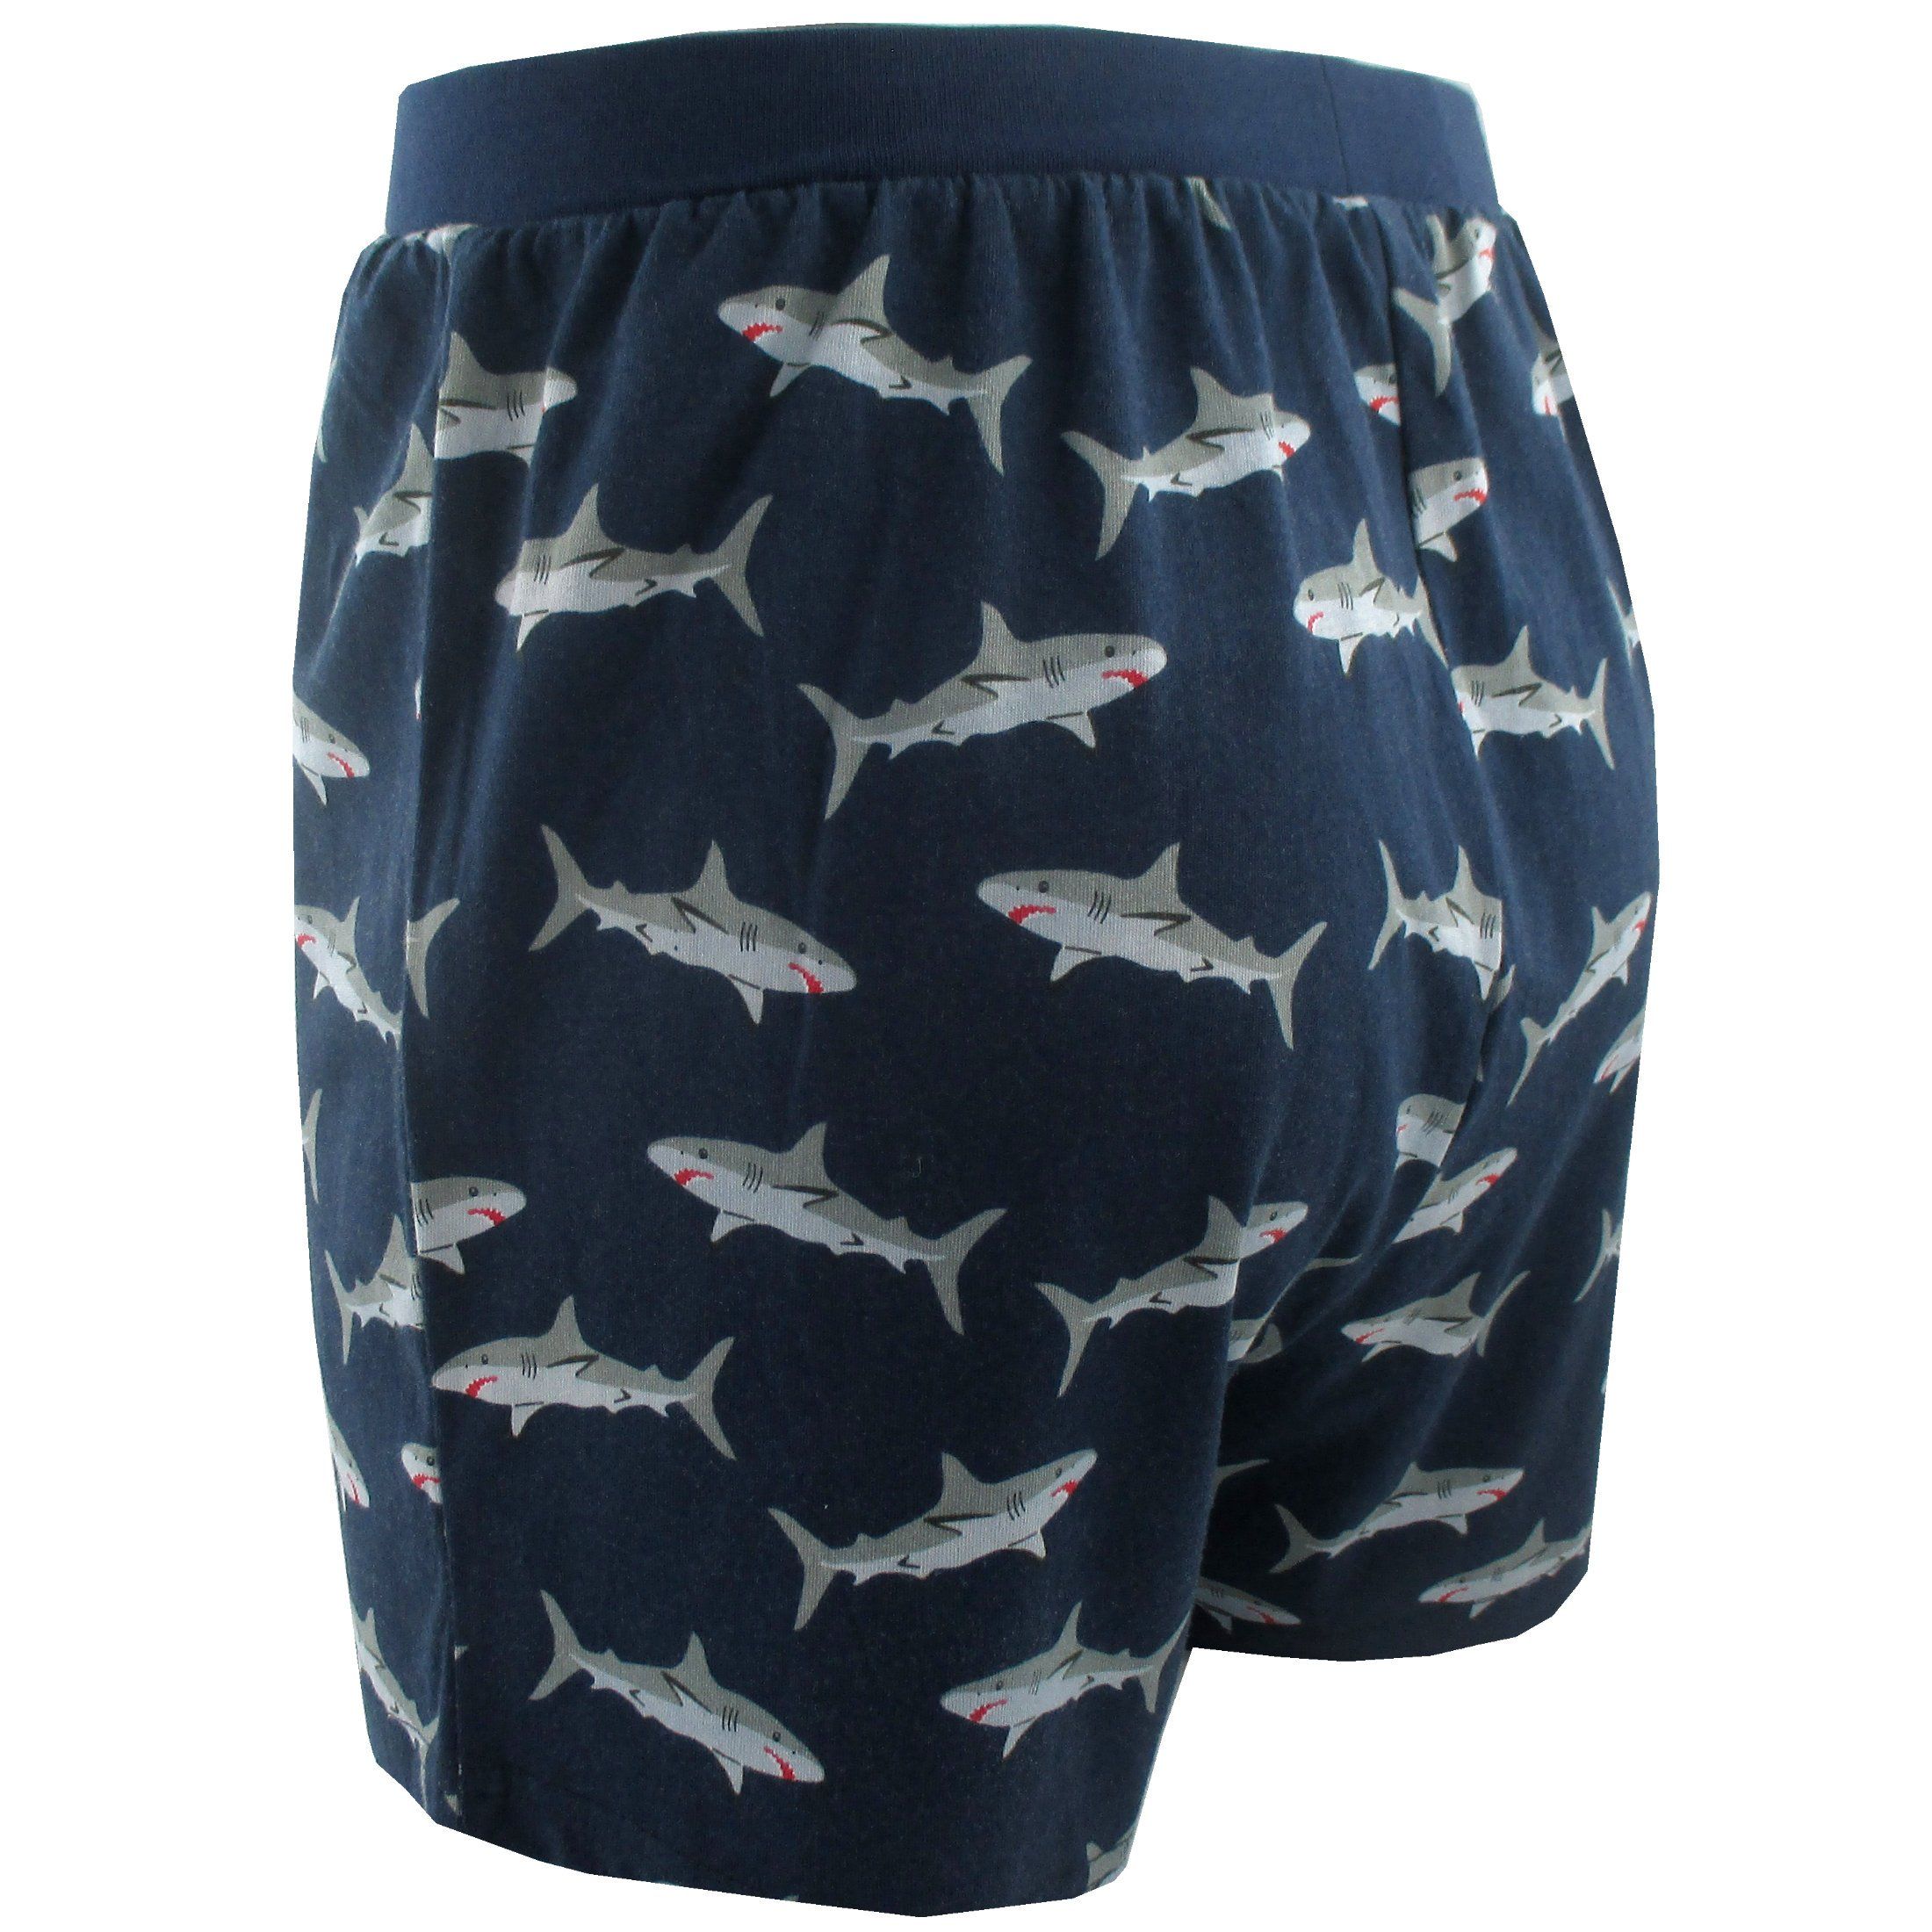 Classic Shark All Over Print Navy Blue Cotton Knit Boxer Shorts for Men